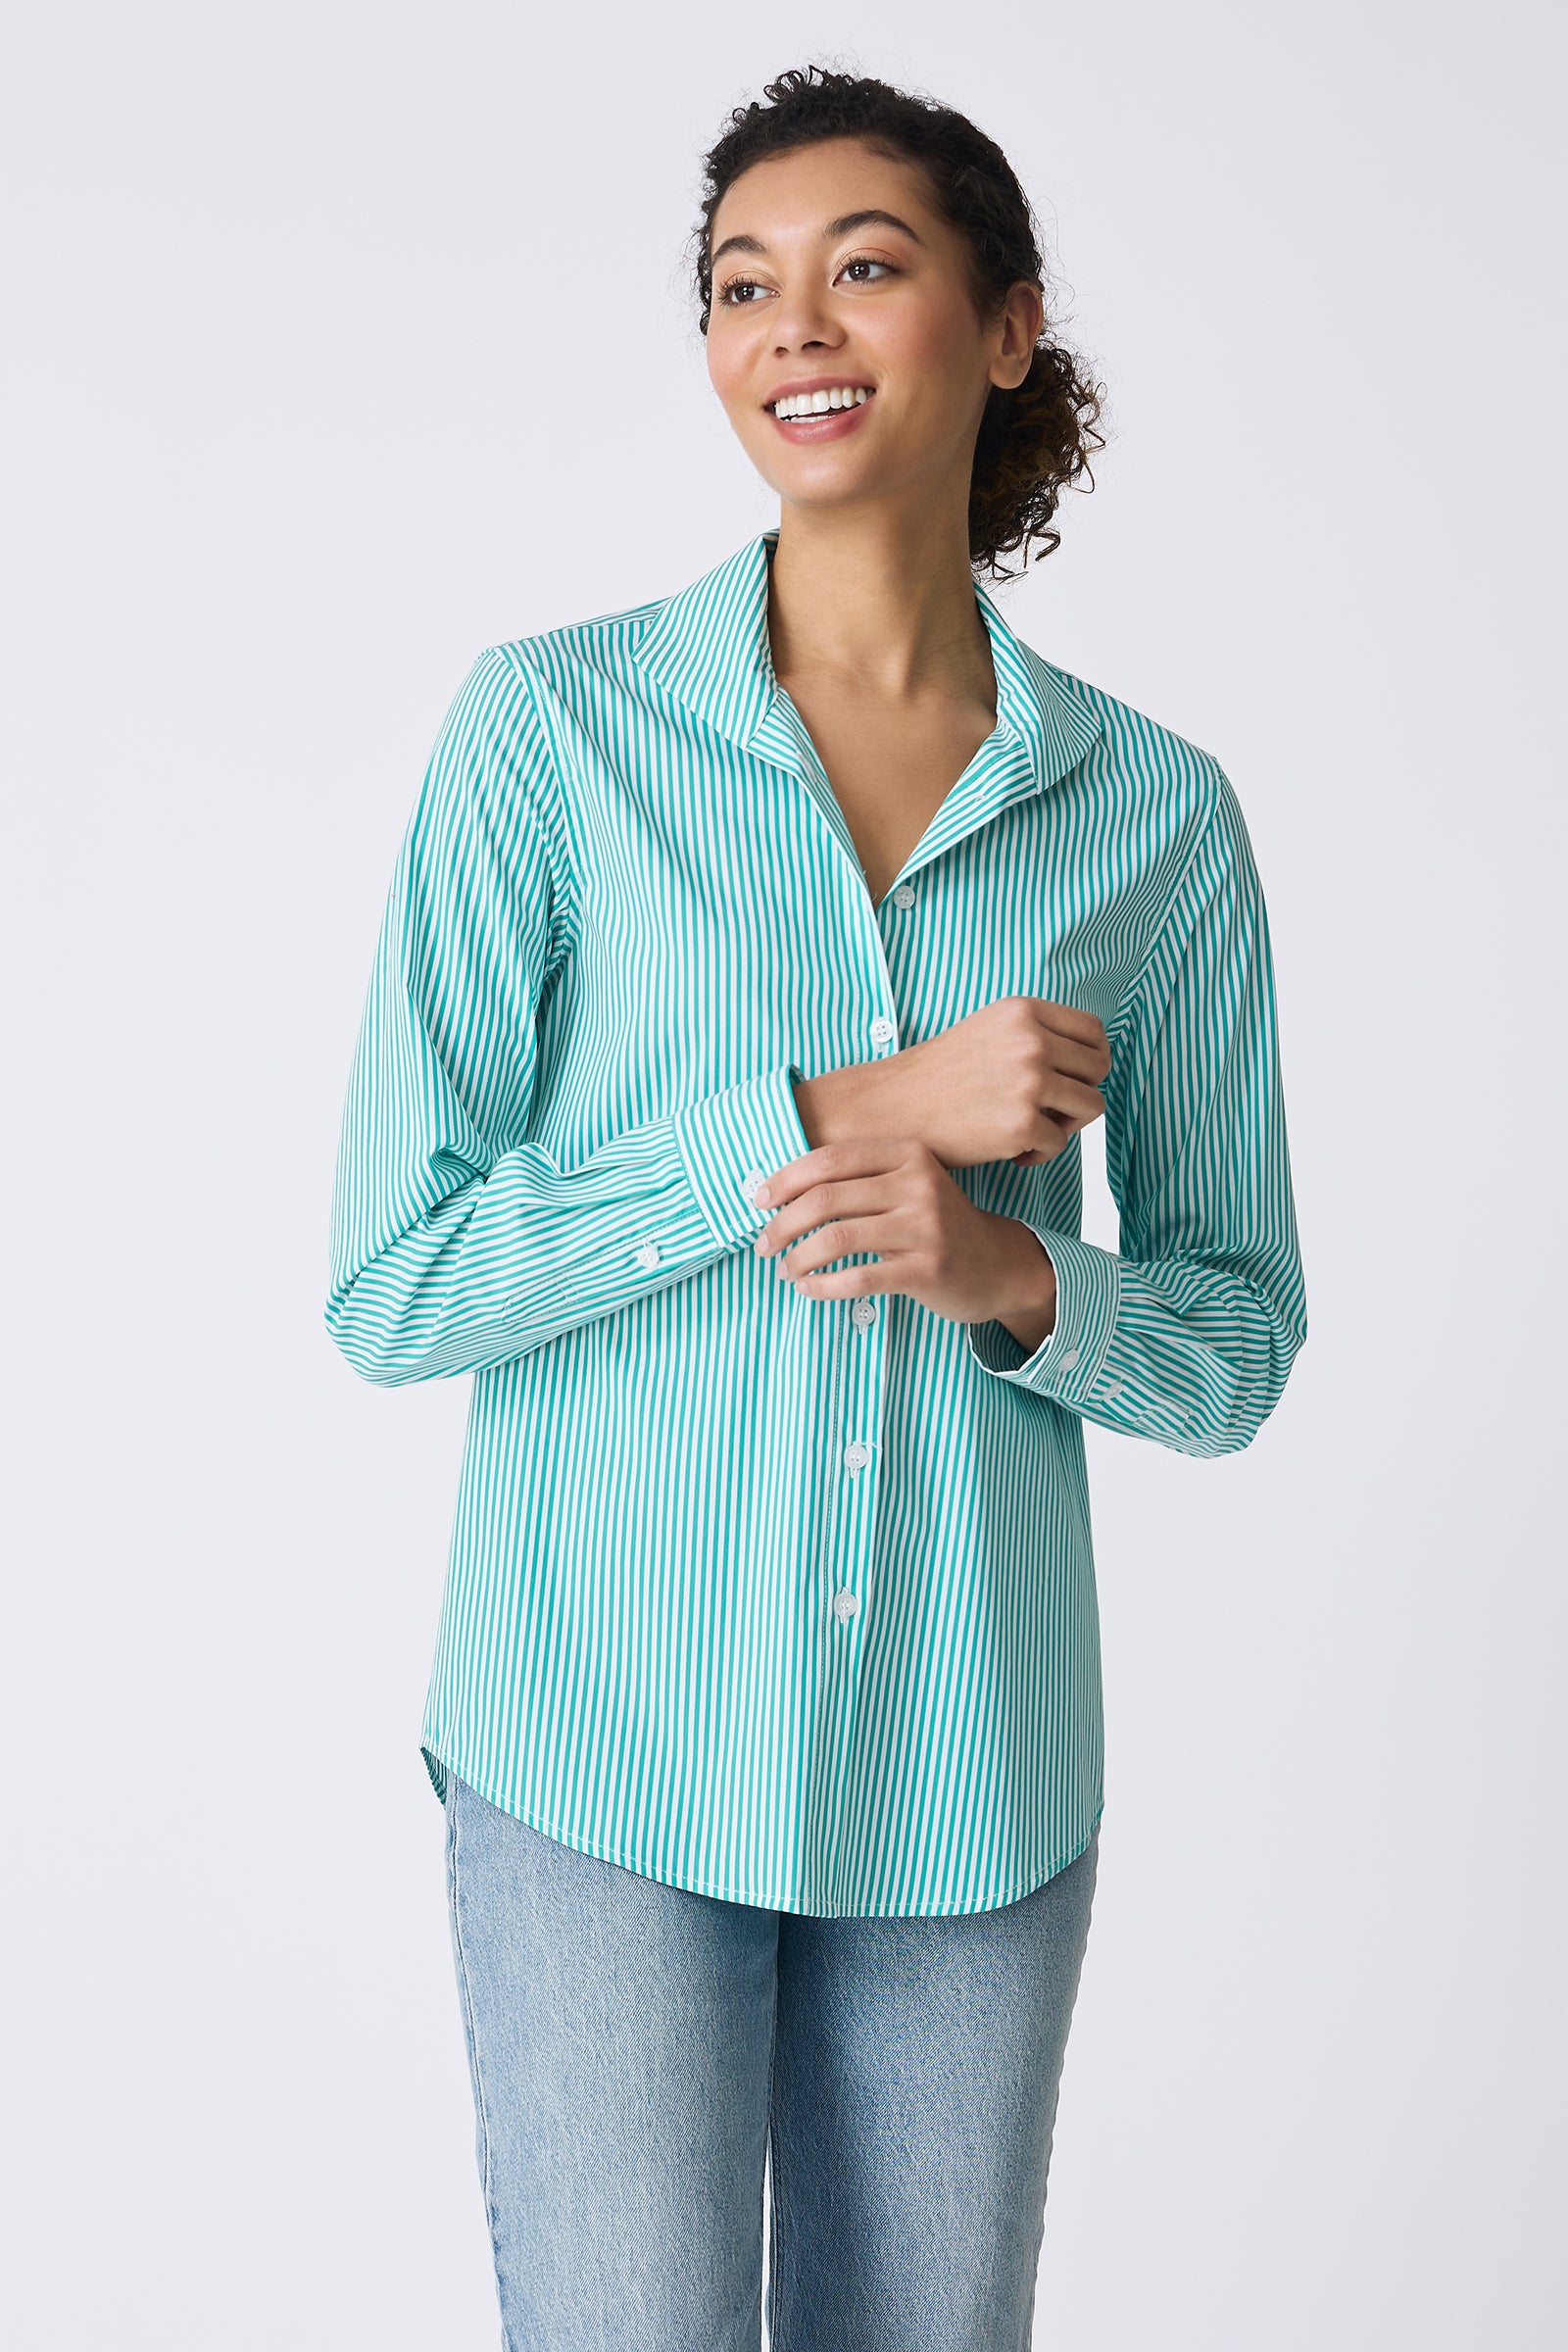 Kal Rieman image of the Ginna Box Pleat Shirt in Miami Stripe Green on model touching wrist and smiling